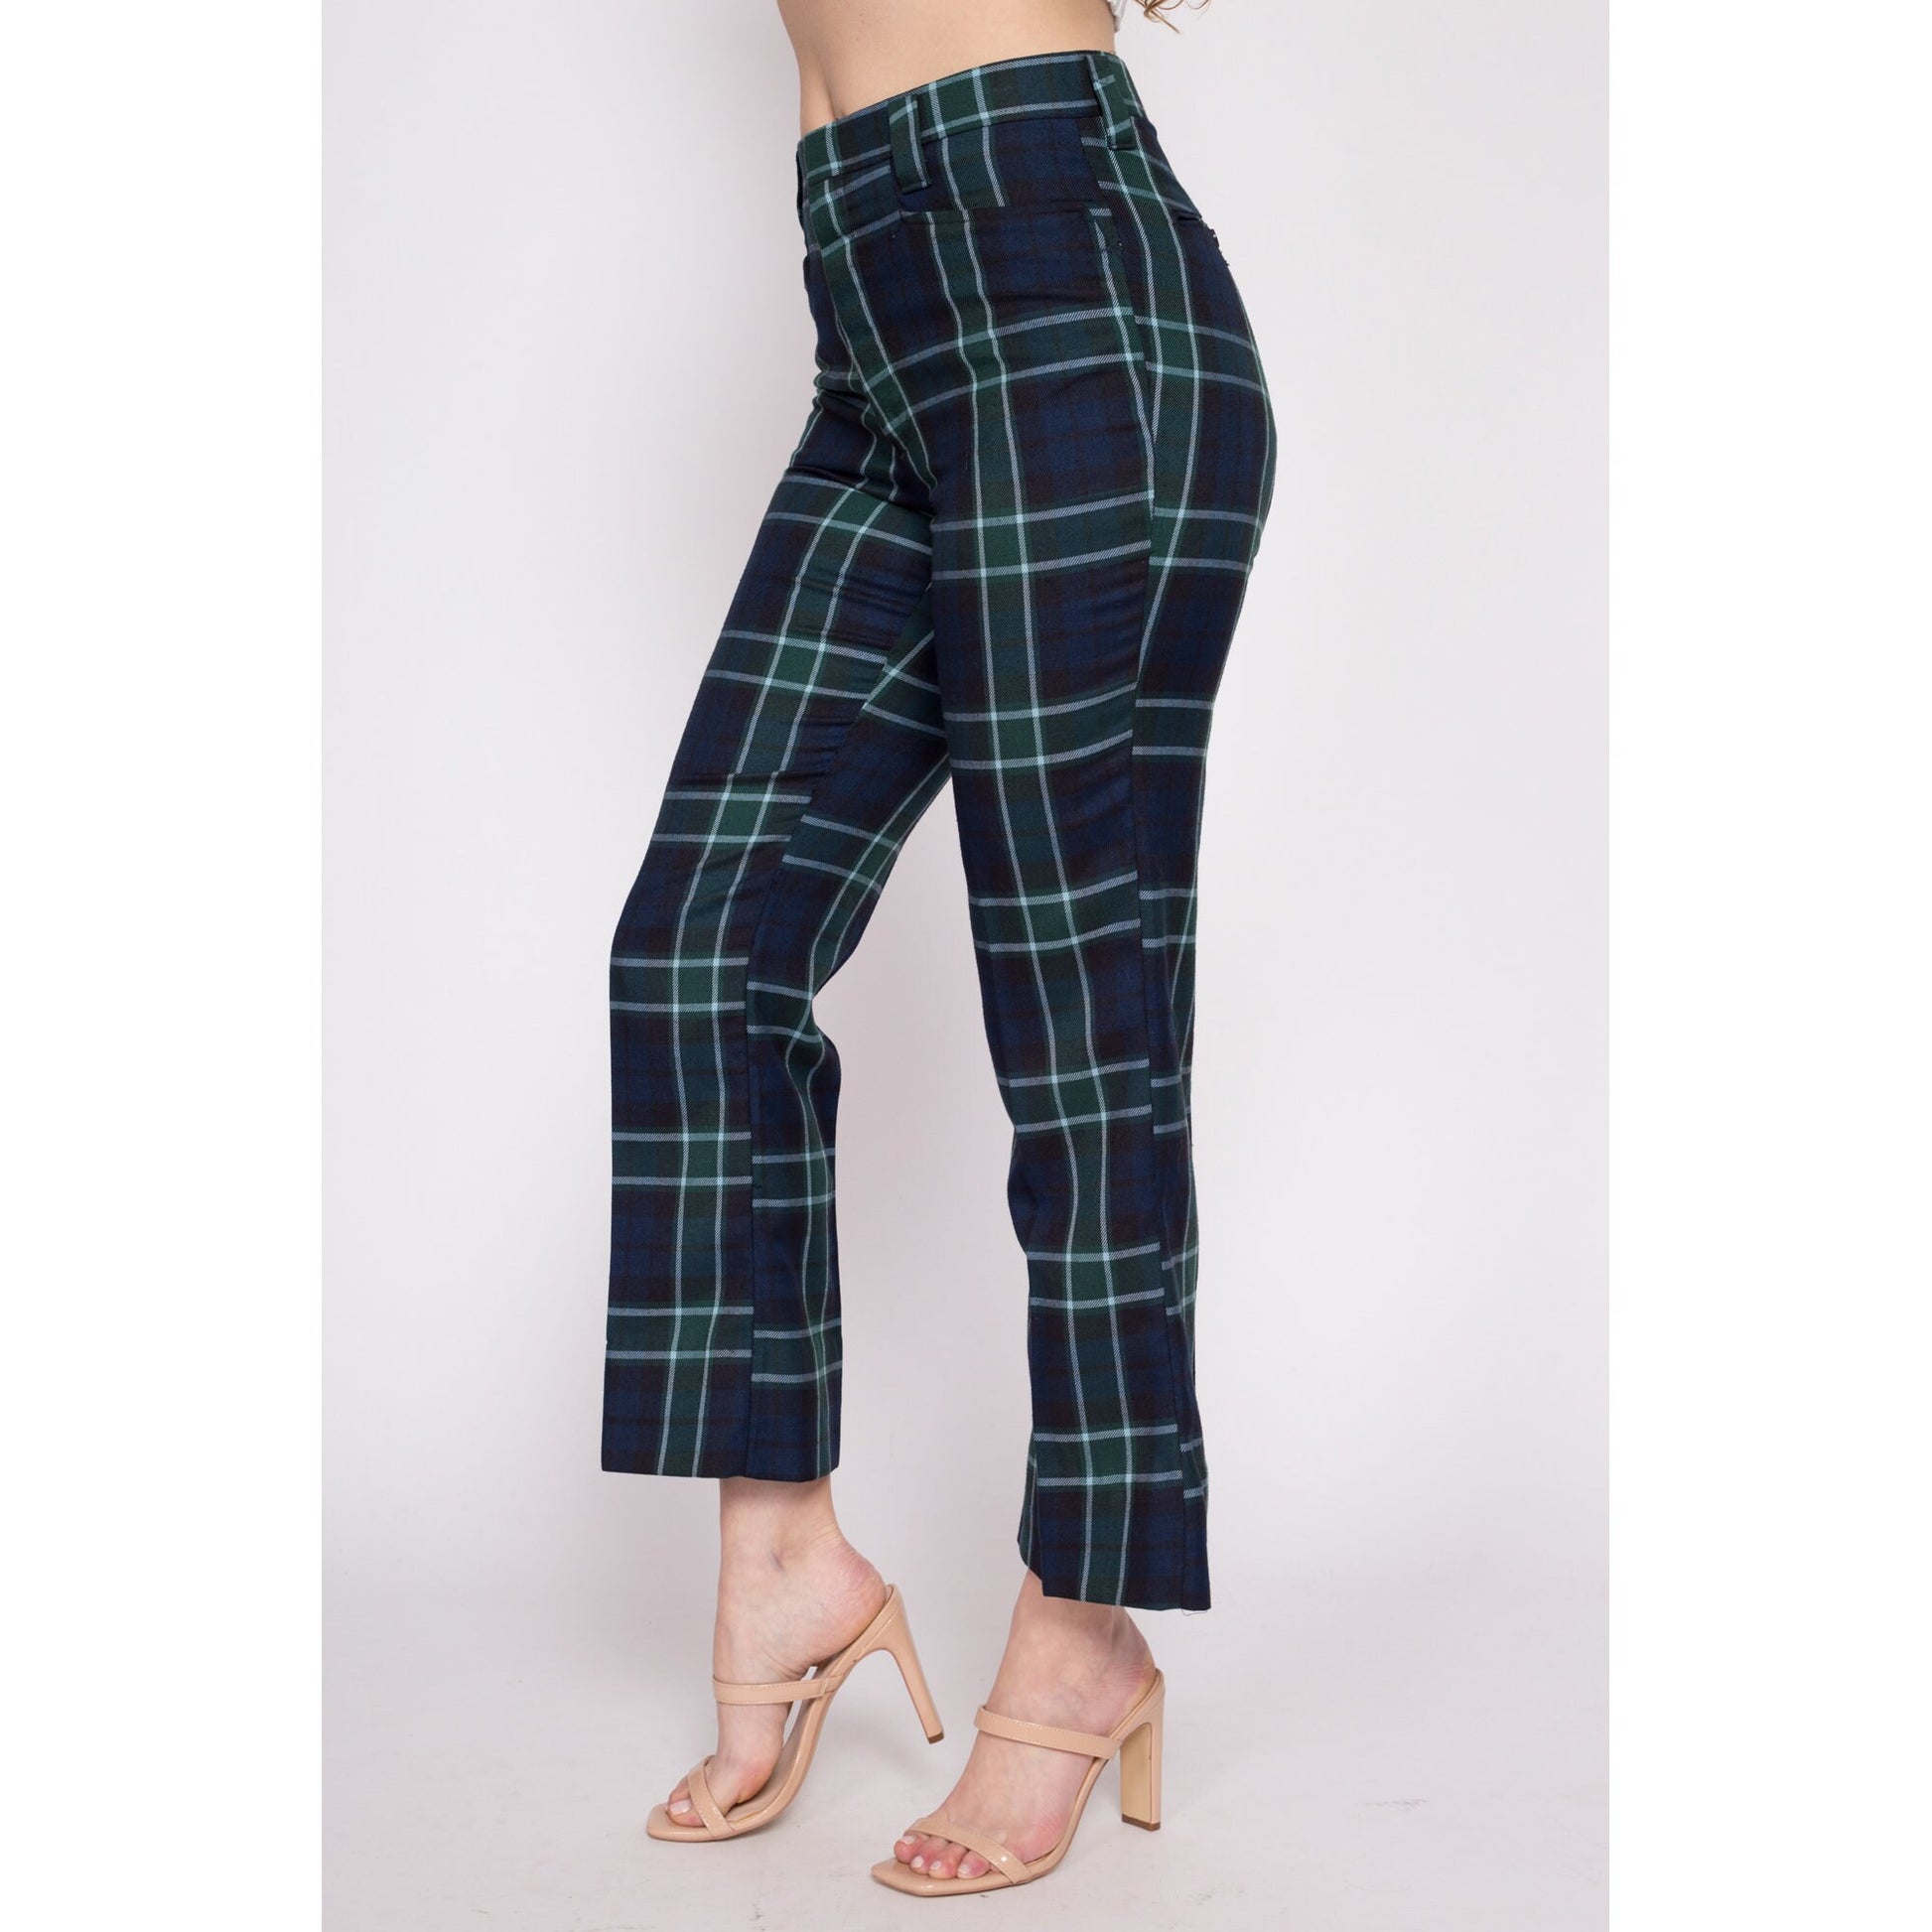 70s Red Plaid High Waisted Pants - Men's Small, Women's Medium, 31 –  Flying Apple Vintage